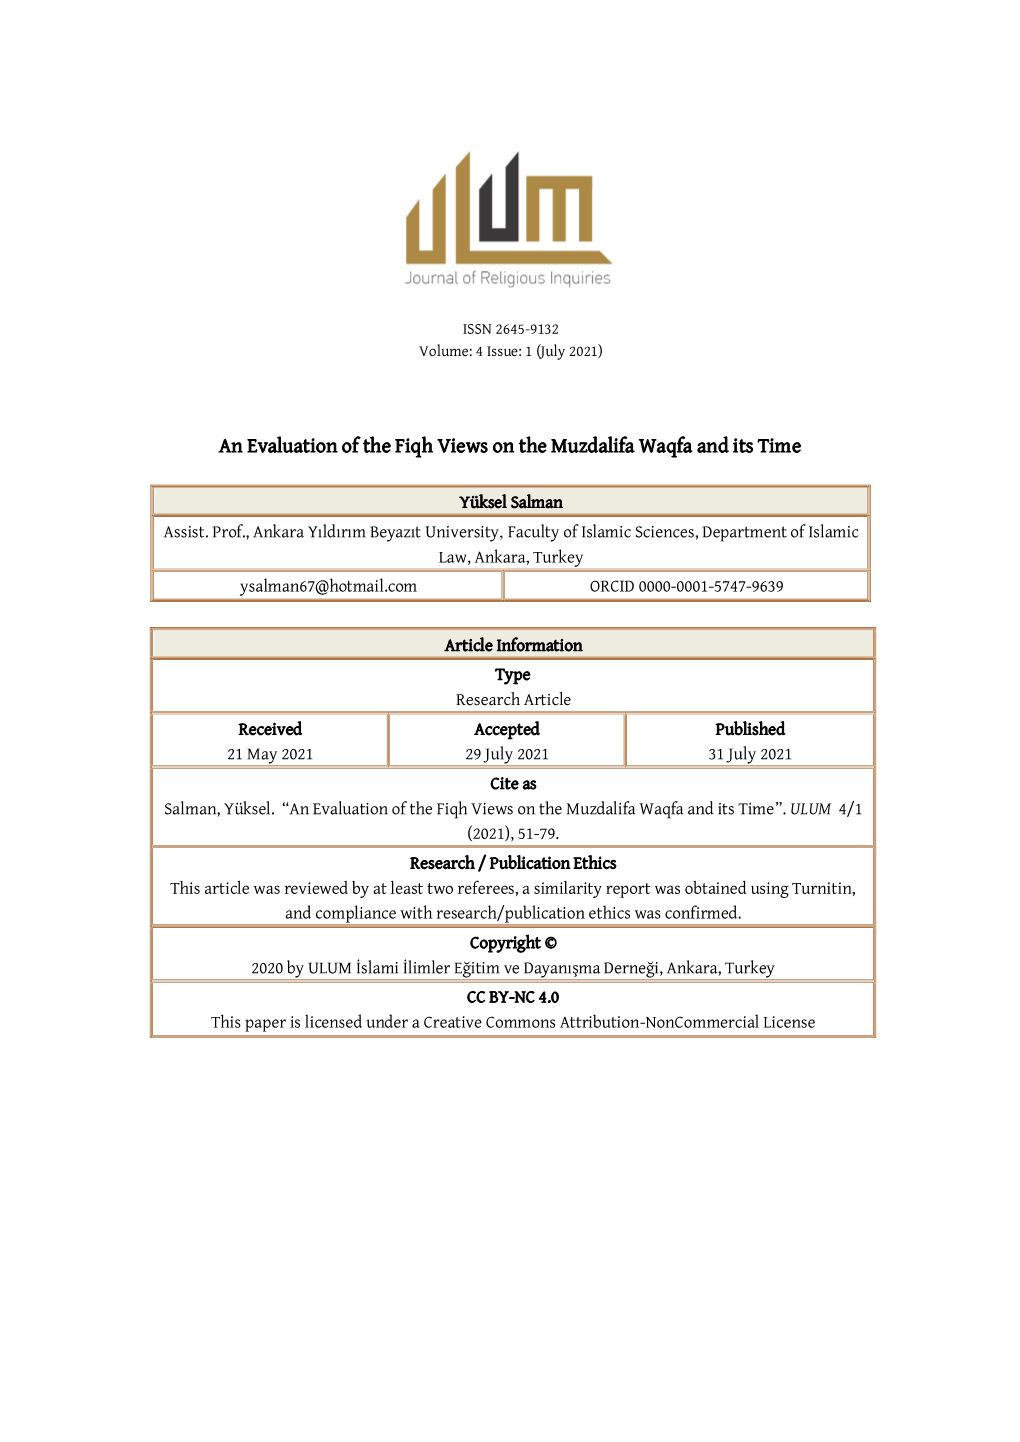 An Evaluation of the Fiqh Views on the Muzdalifa Waqfa and Its Time